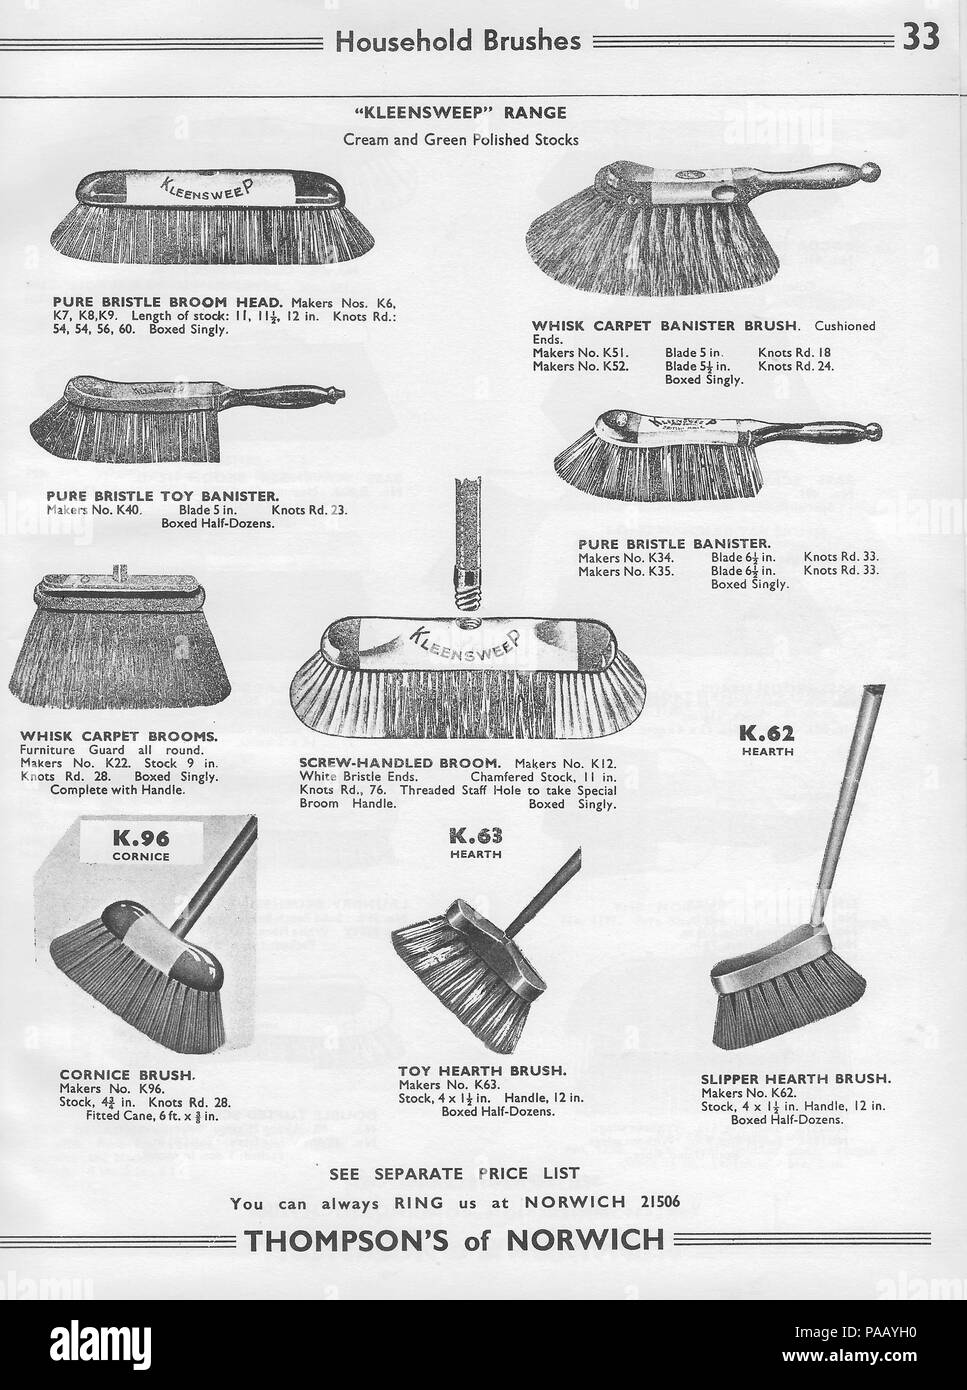 https://c8.alamy.com/comp/PAAYH0/general-wholesale-catalogue-hardware-factors-h-thompson-sons-ltd-chalk-hill-works-norwich-england-uk-1940s-1950s-retro-vintage-household-products-items-illustrated-pictures-drawings-illustrations-monochrome-black-and-white-PAAYH0.jpg